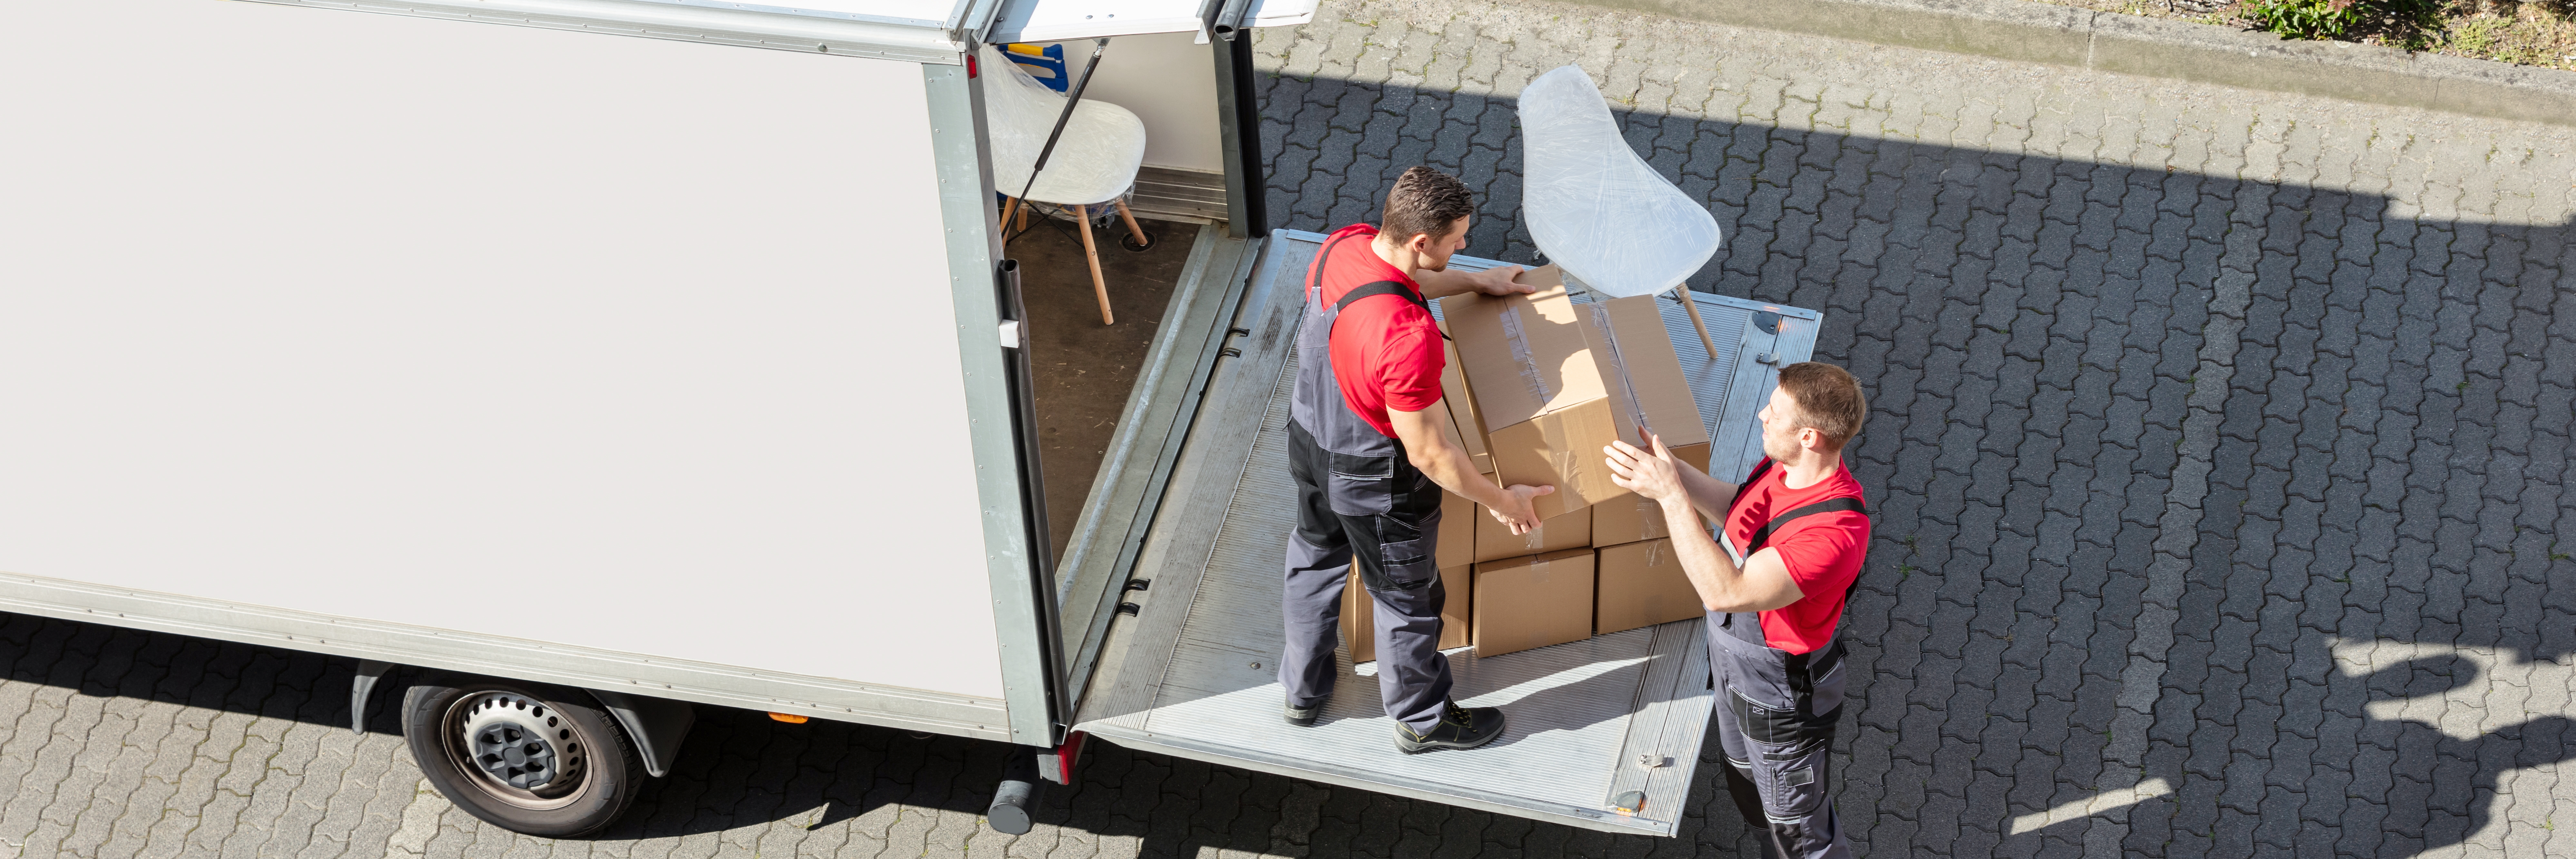 Movers With Van Or Truck. Moving And Delivery. | Source: Shutterstock